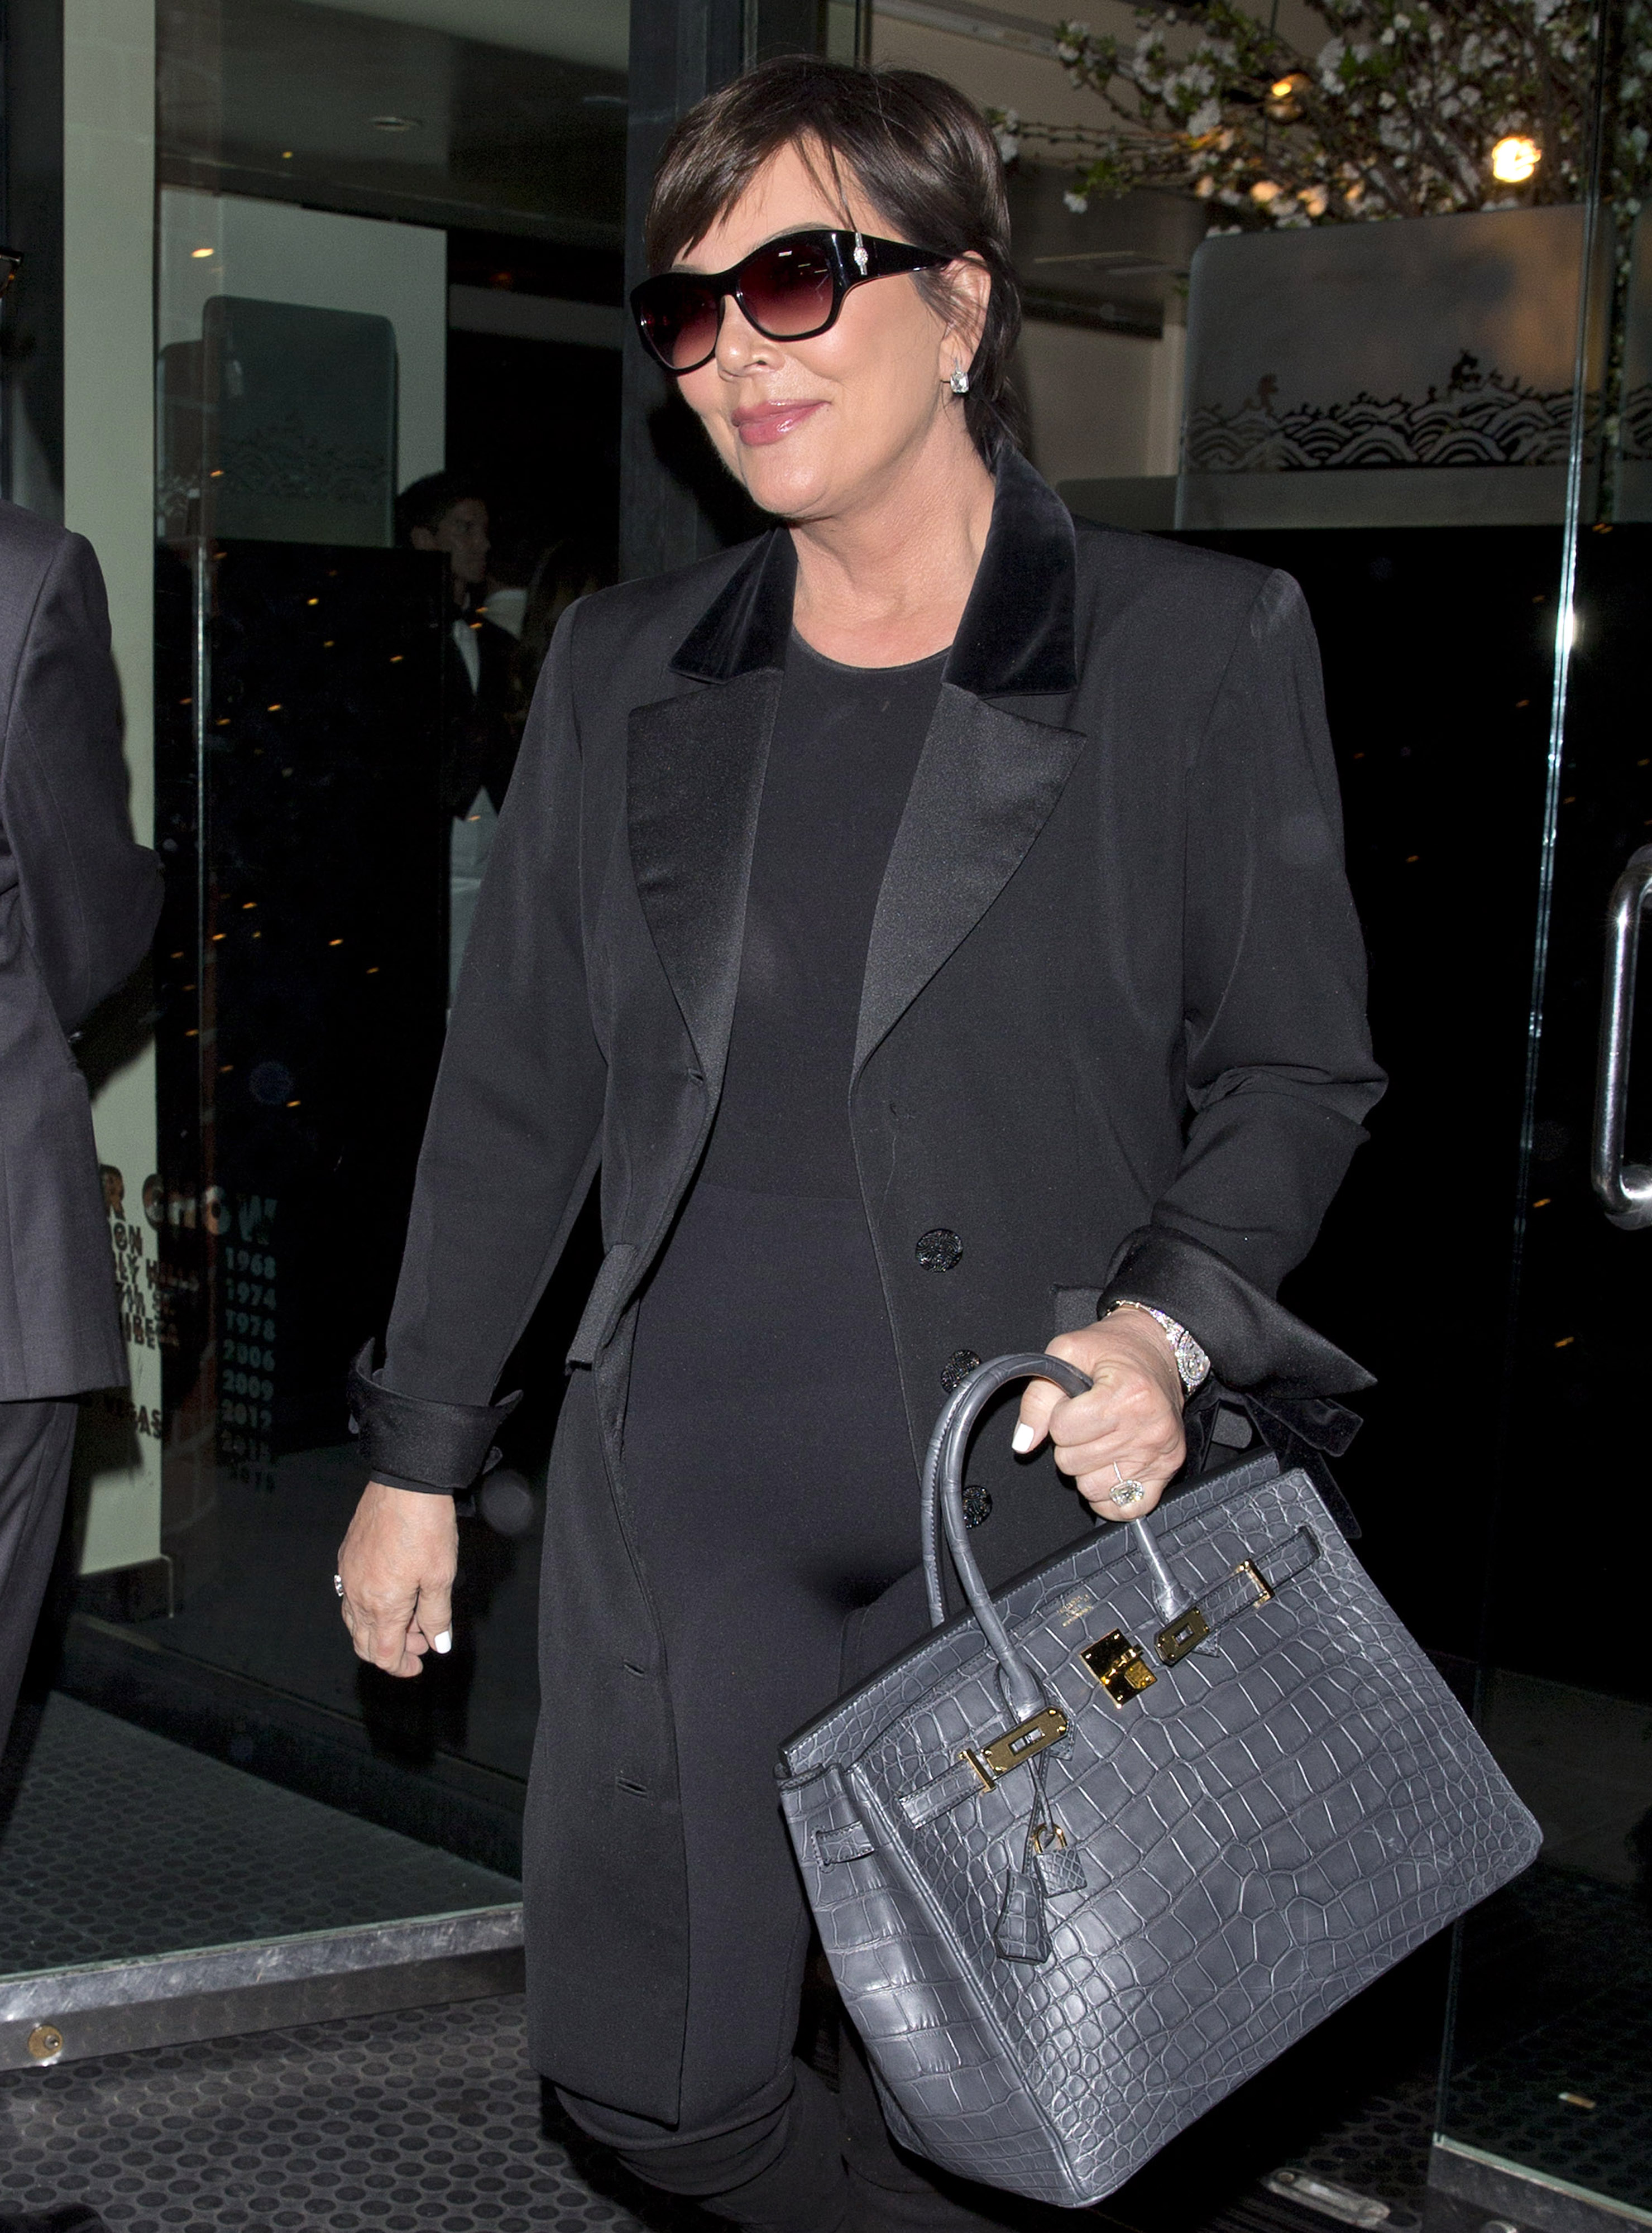 Kris Jenner Shows Off Curves in Chic, Black Outfit: See the Pics ...